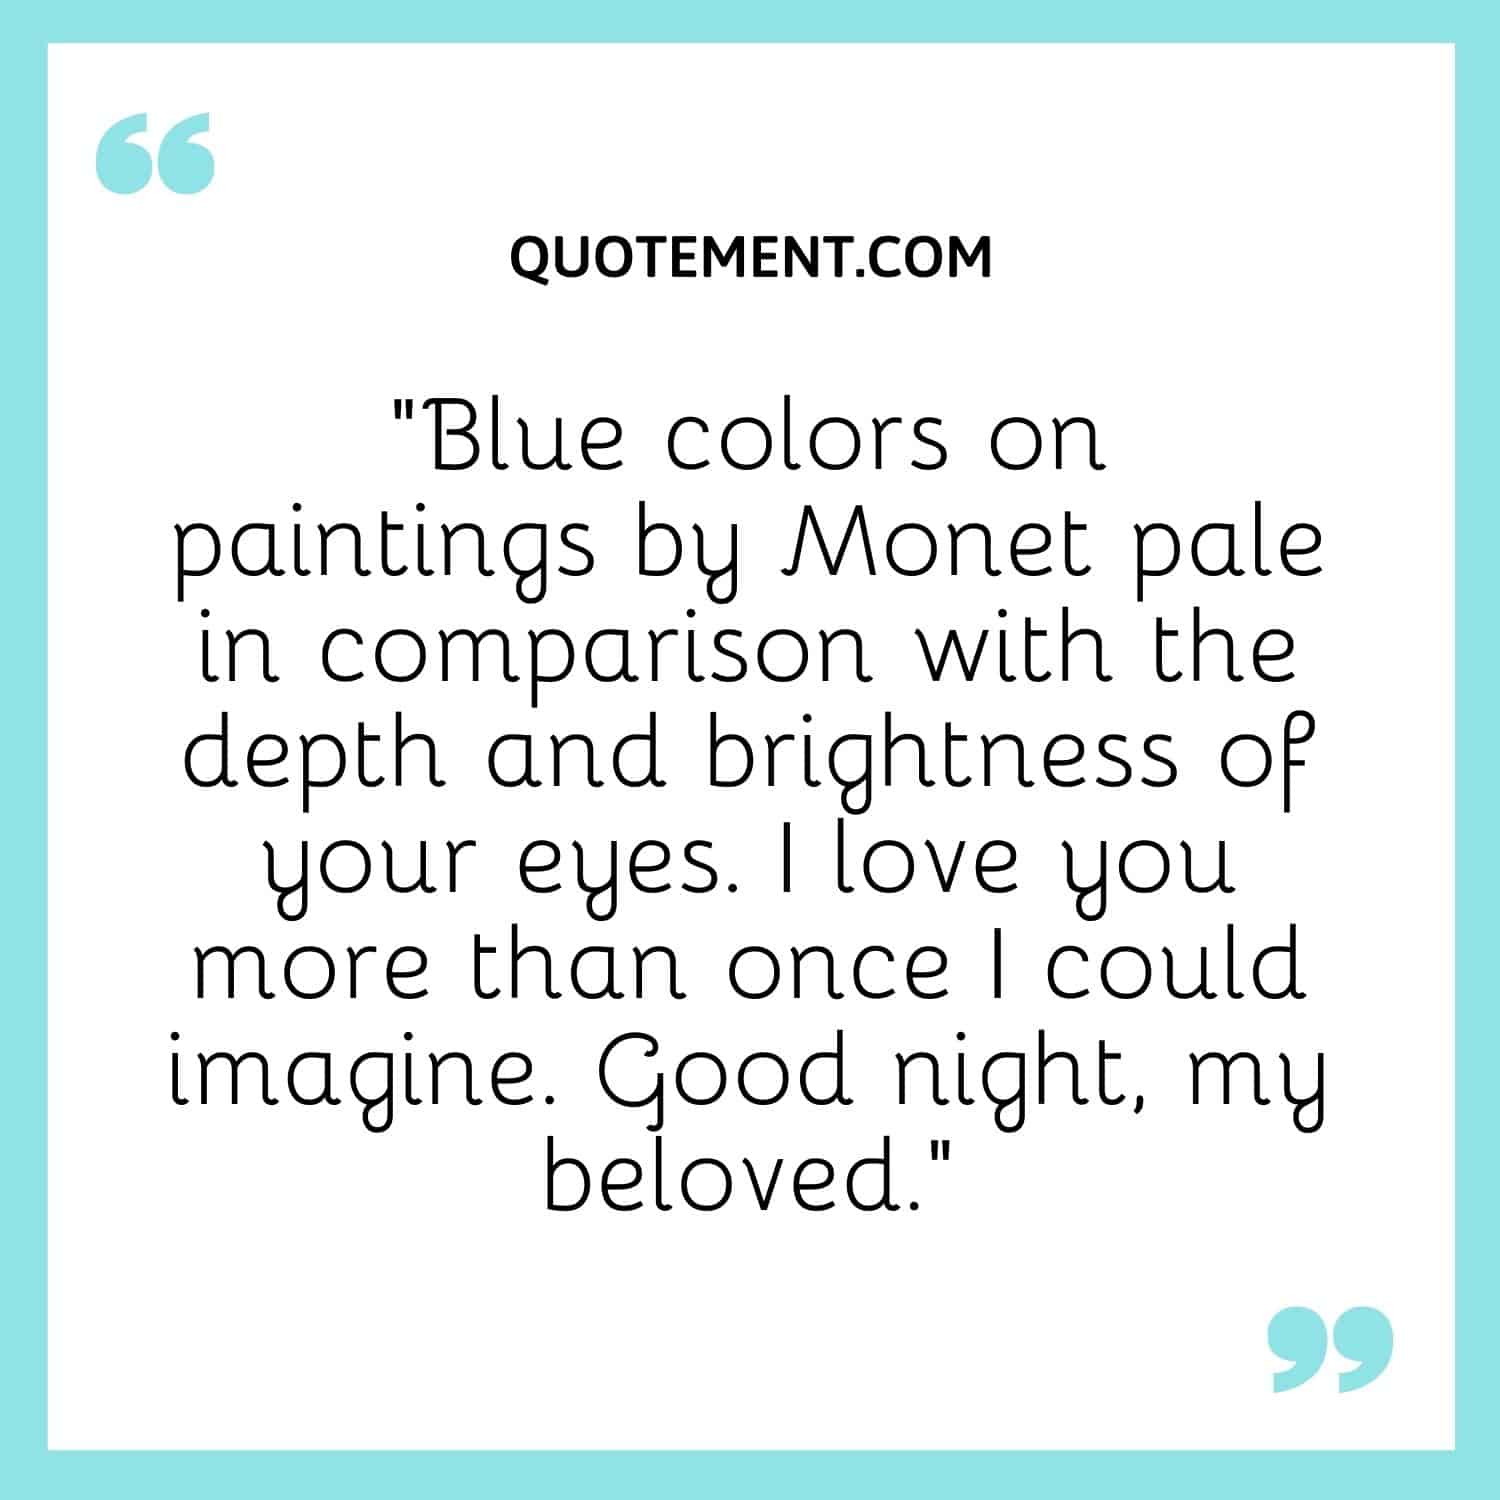 Blue colors on paintings by Monet pale in comparison with the depth and brightness of your eyes.